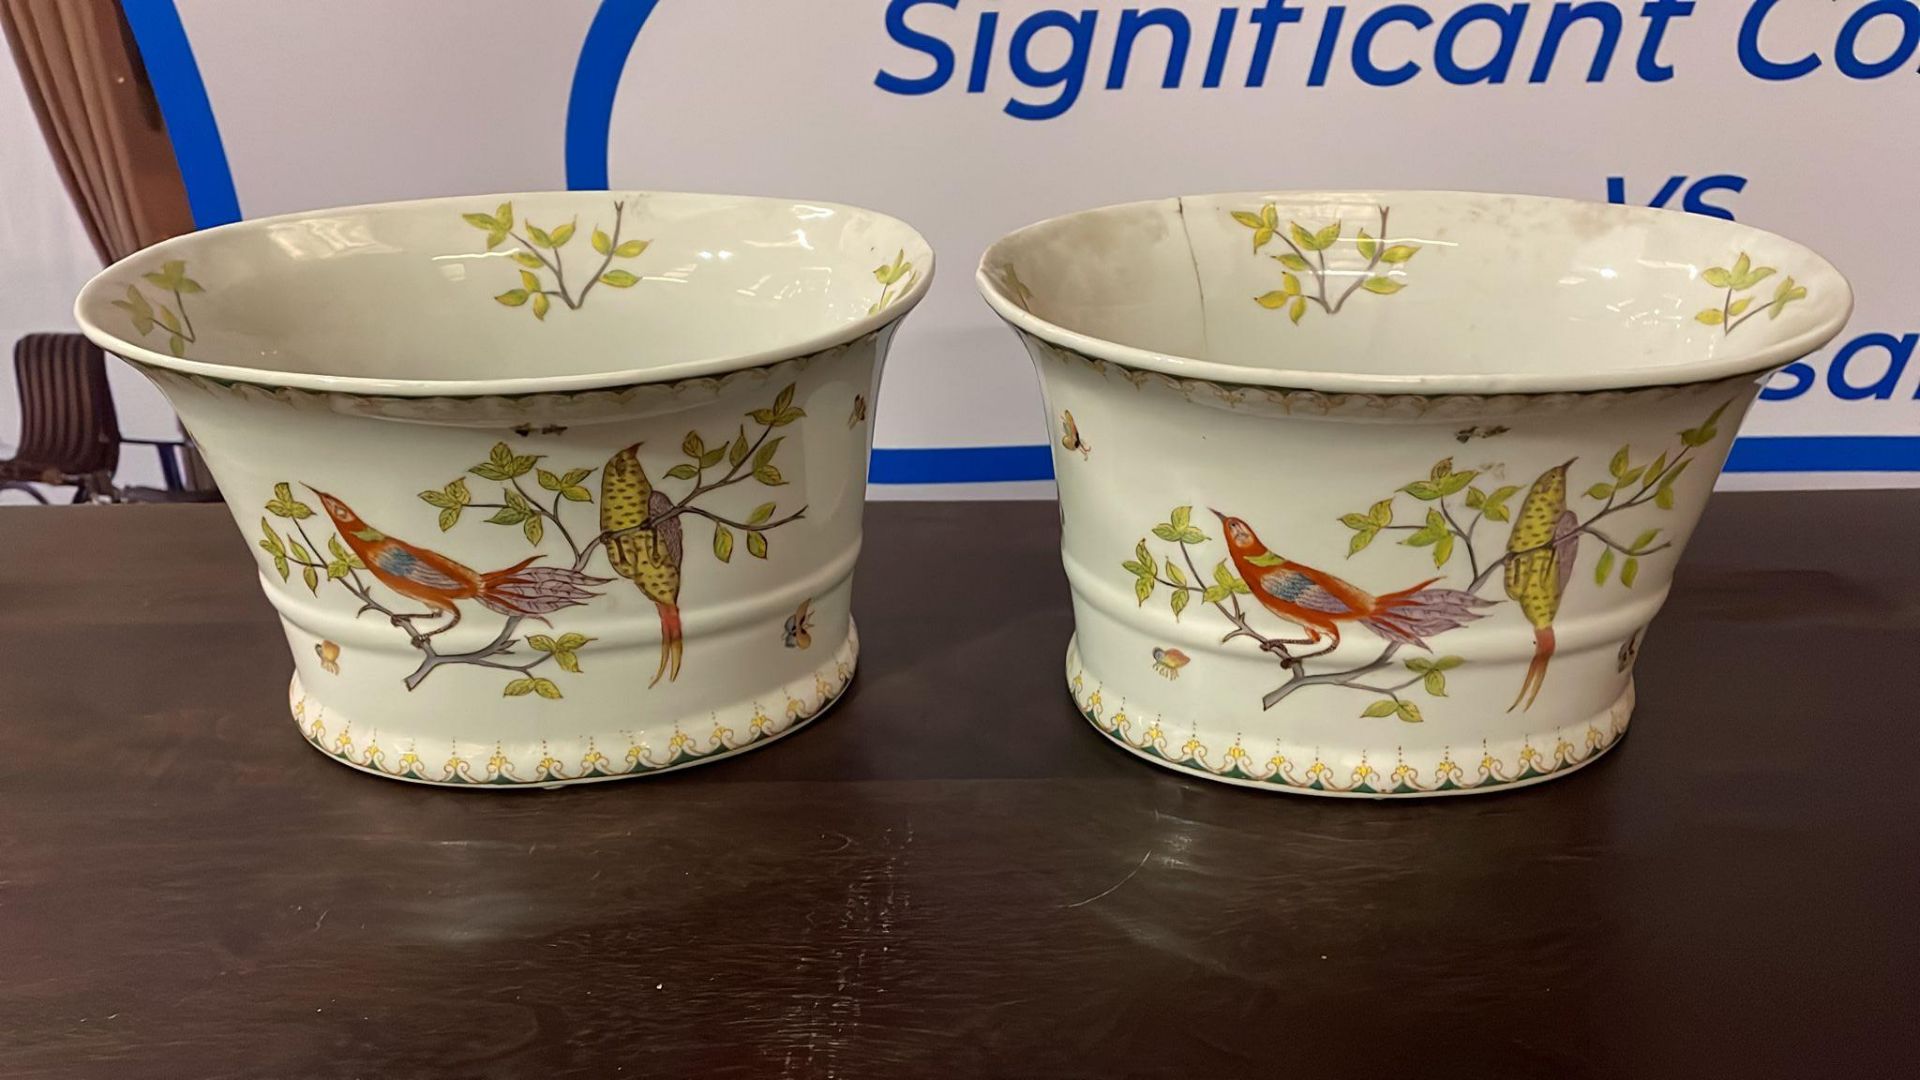 2 x Chinese Asian ovoid form decorative bowls with birds of paradise and butterfiy decoration